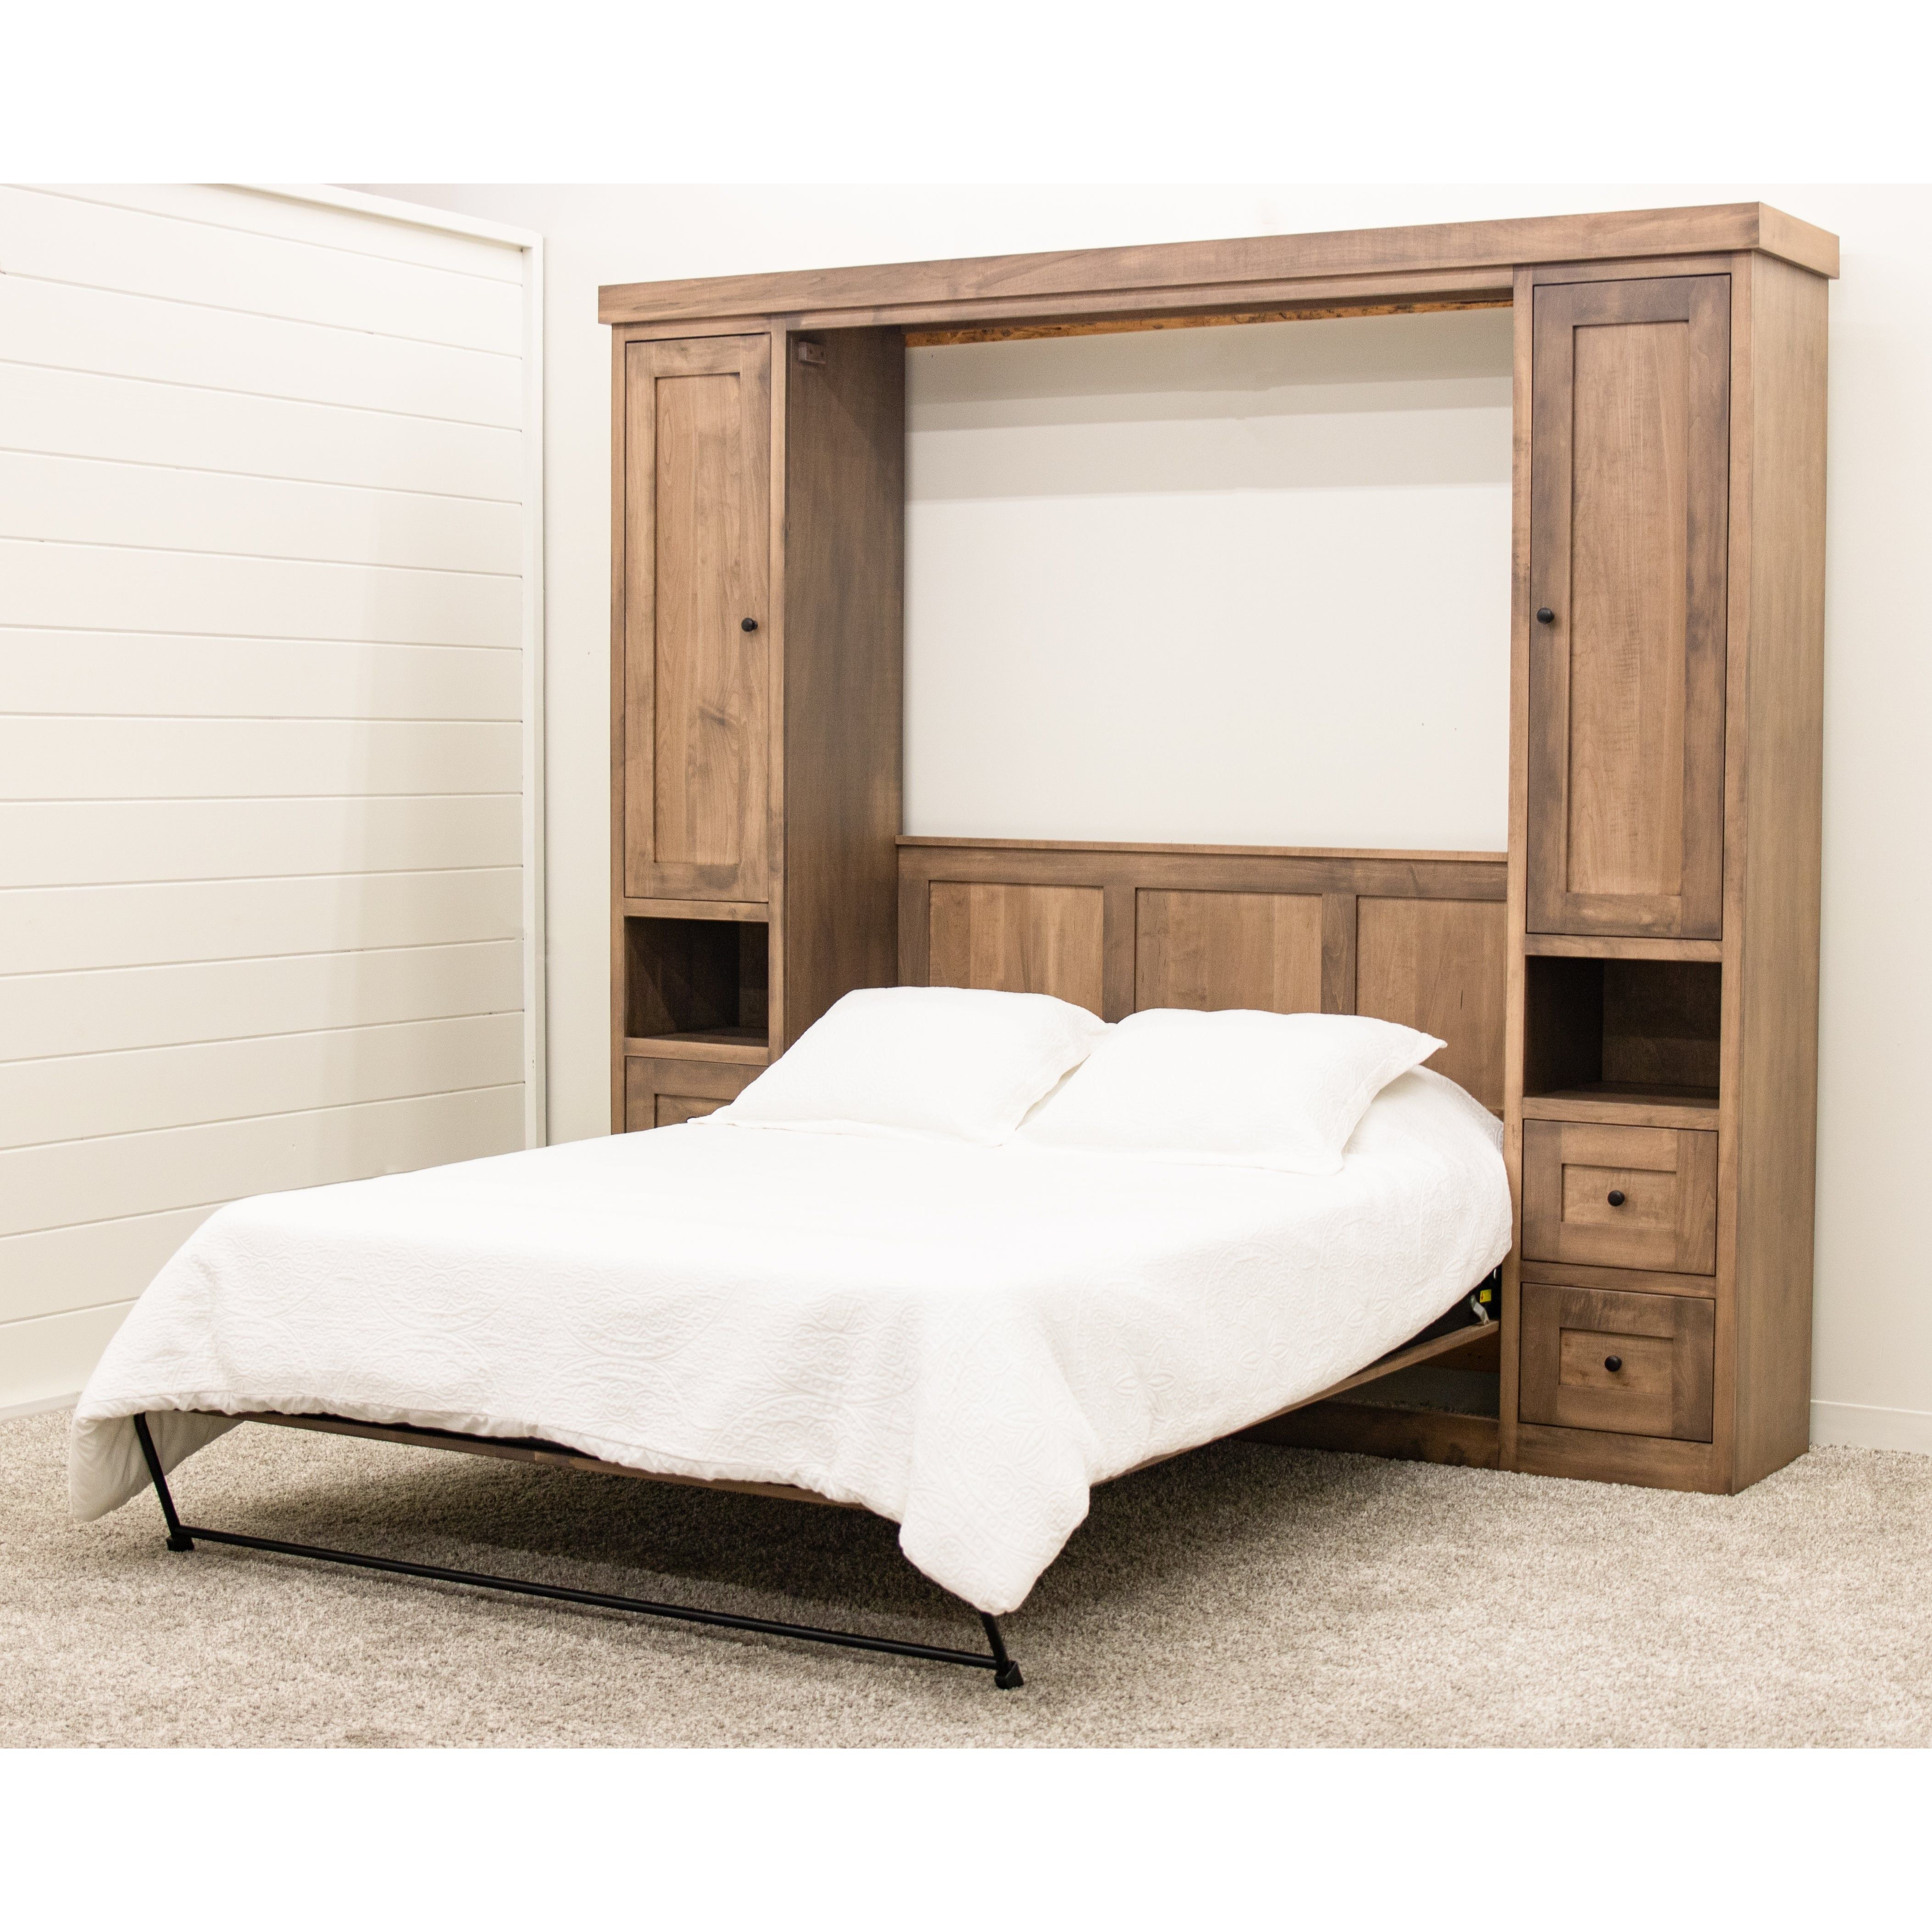 Sunset Hideaway Murphy Wall Bed with Bookcases